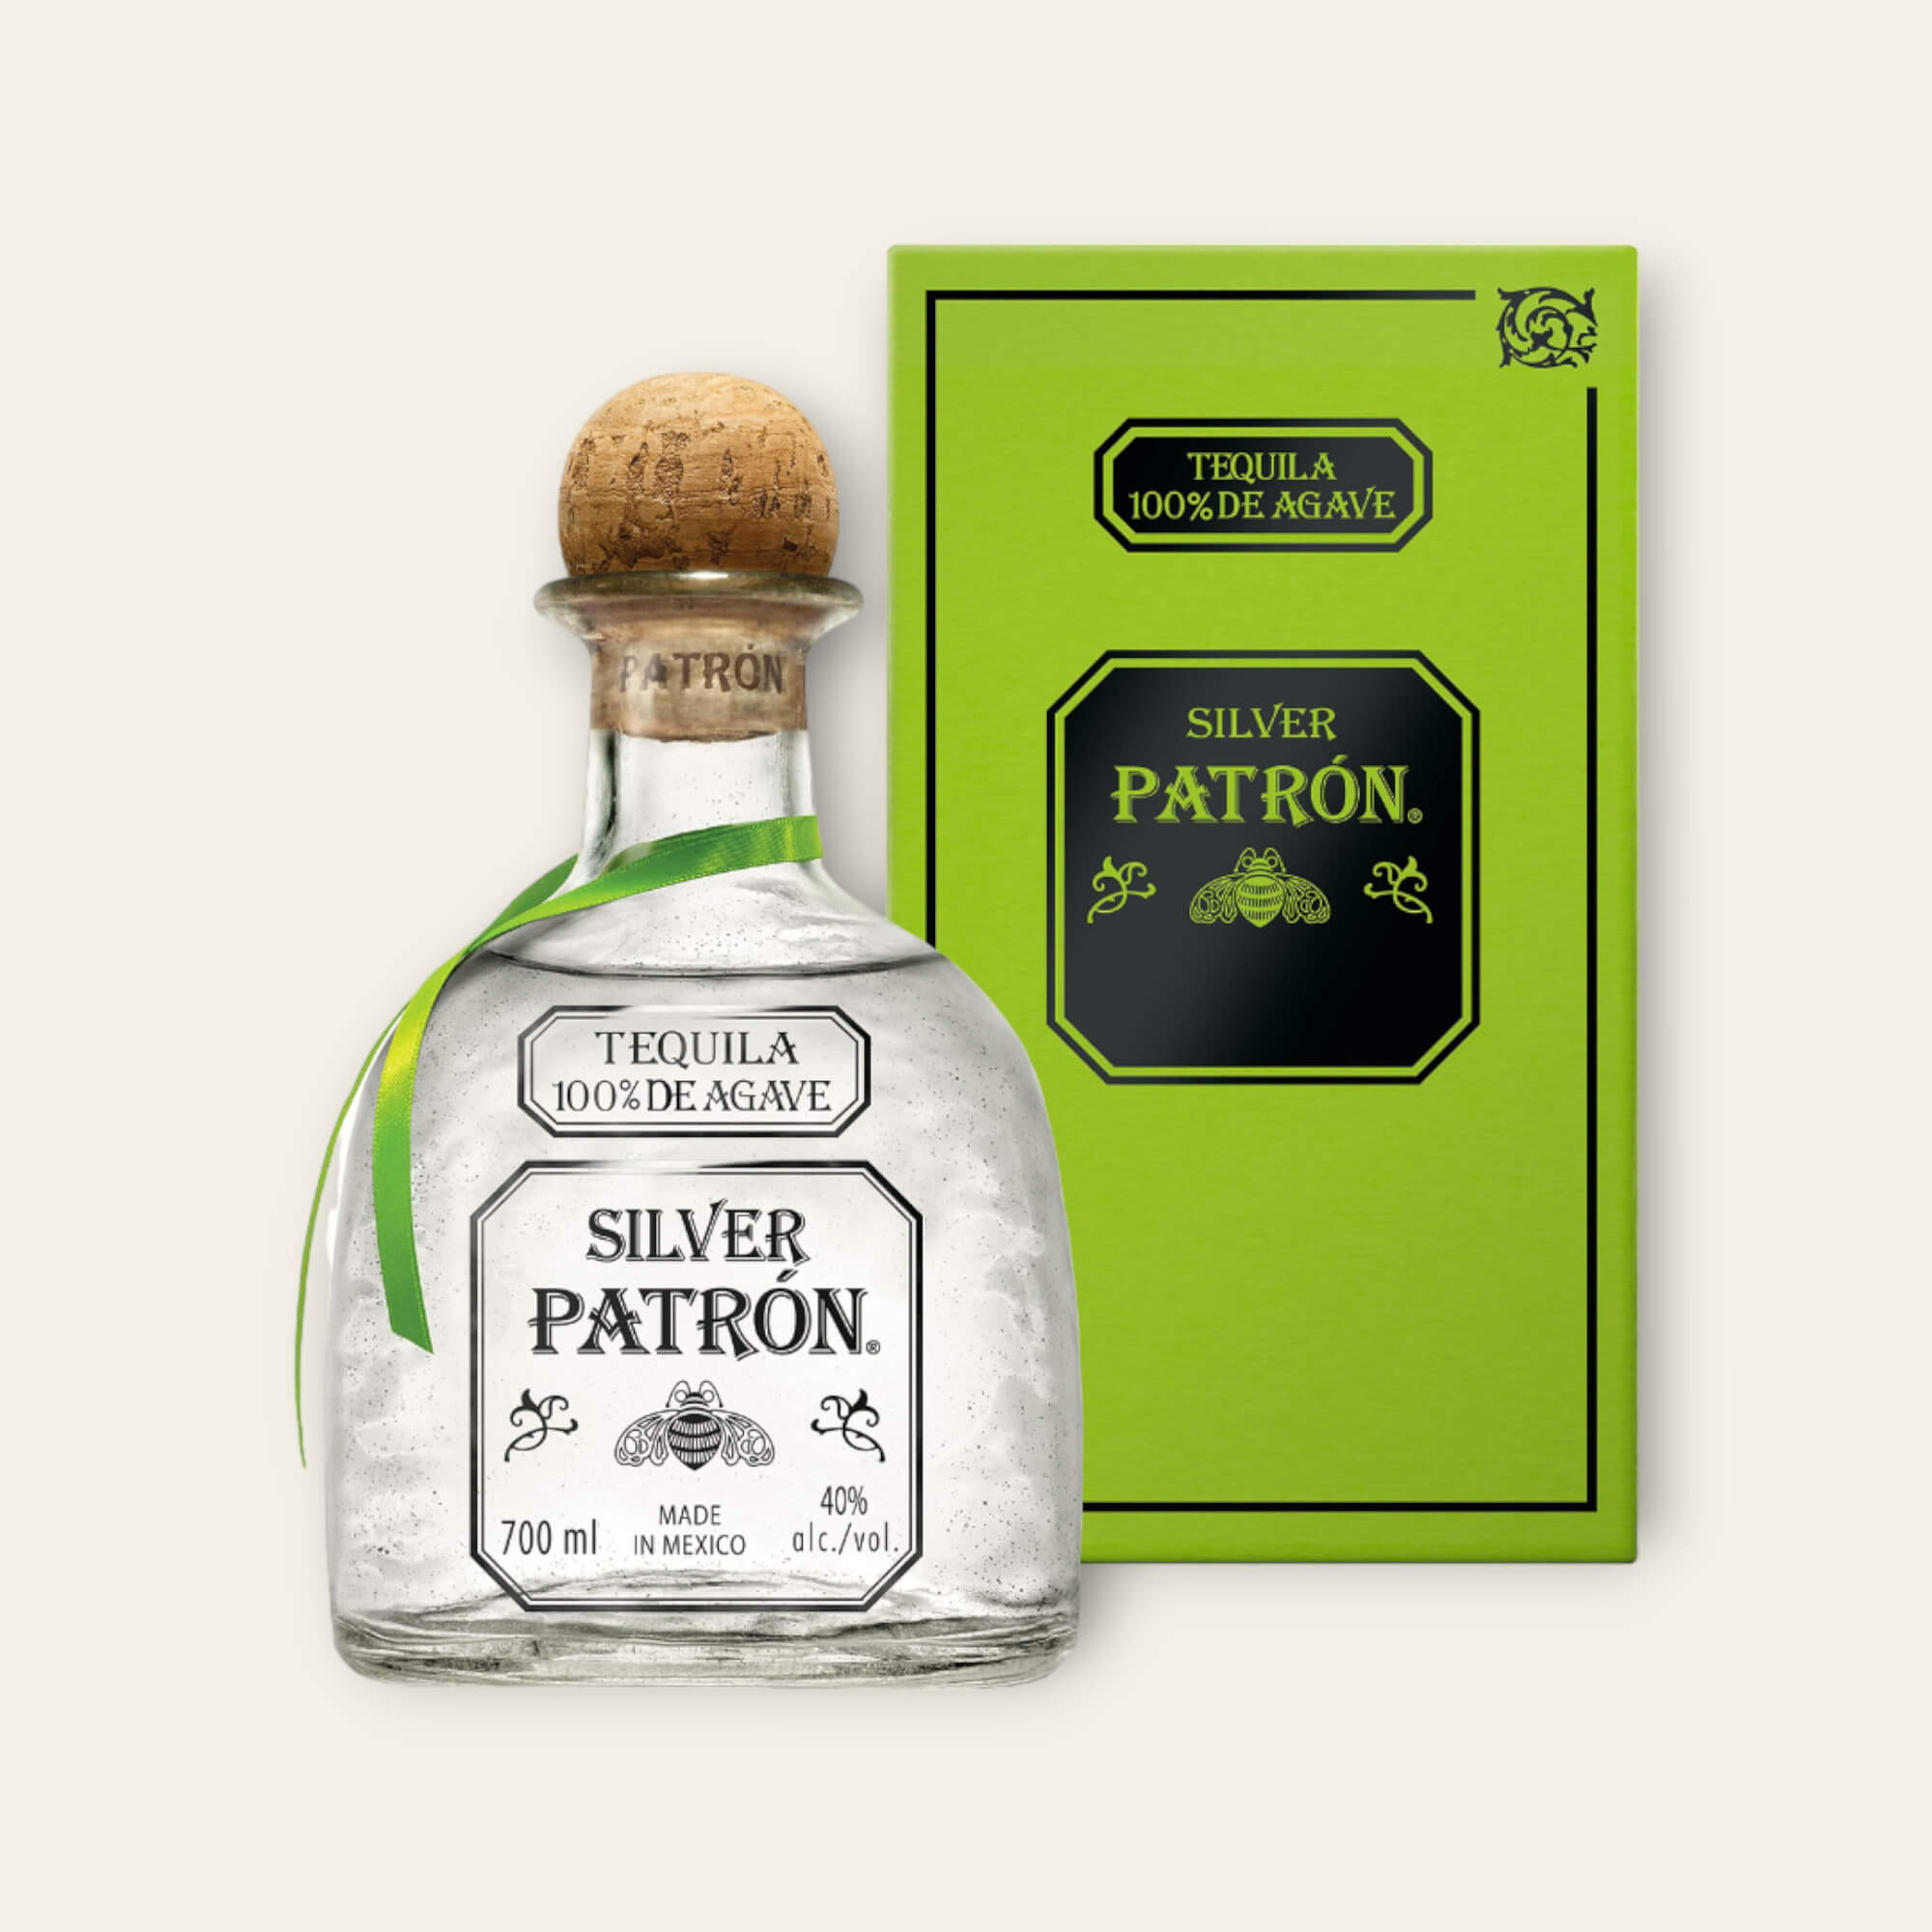 Big Bottle of Patron: Elevate Your Tequila Experience